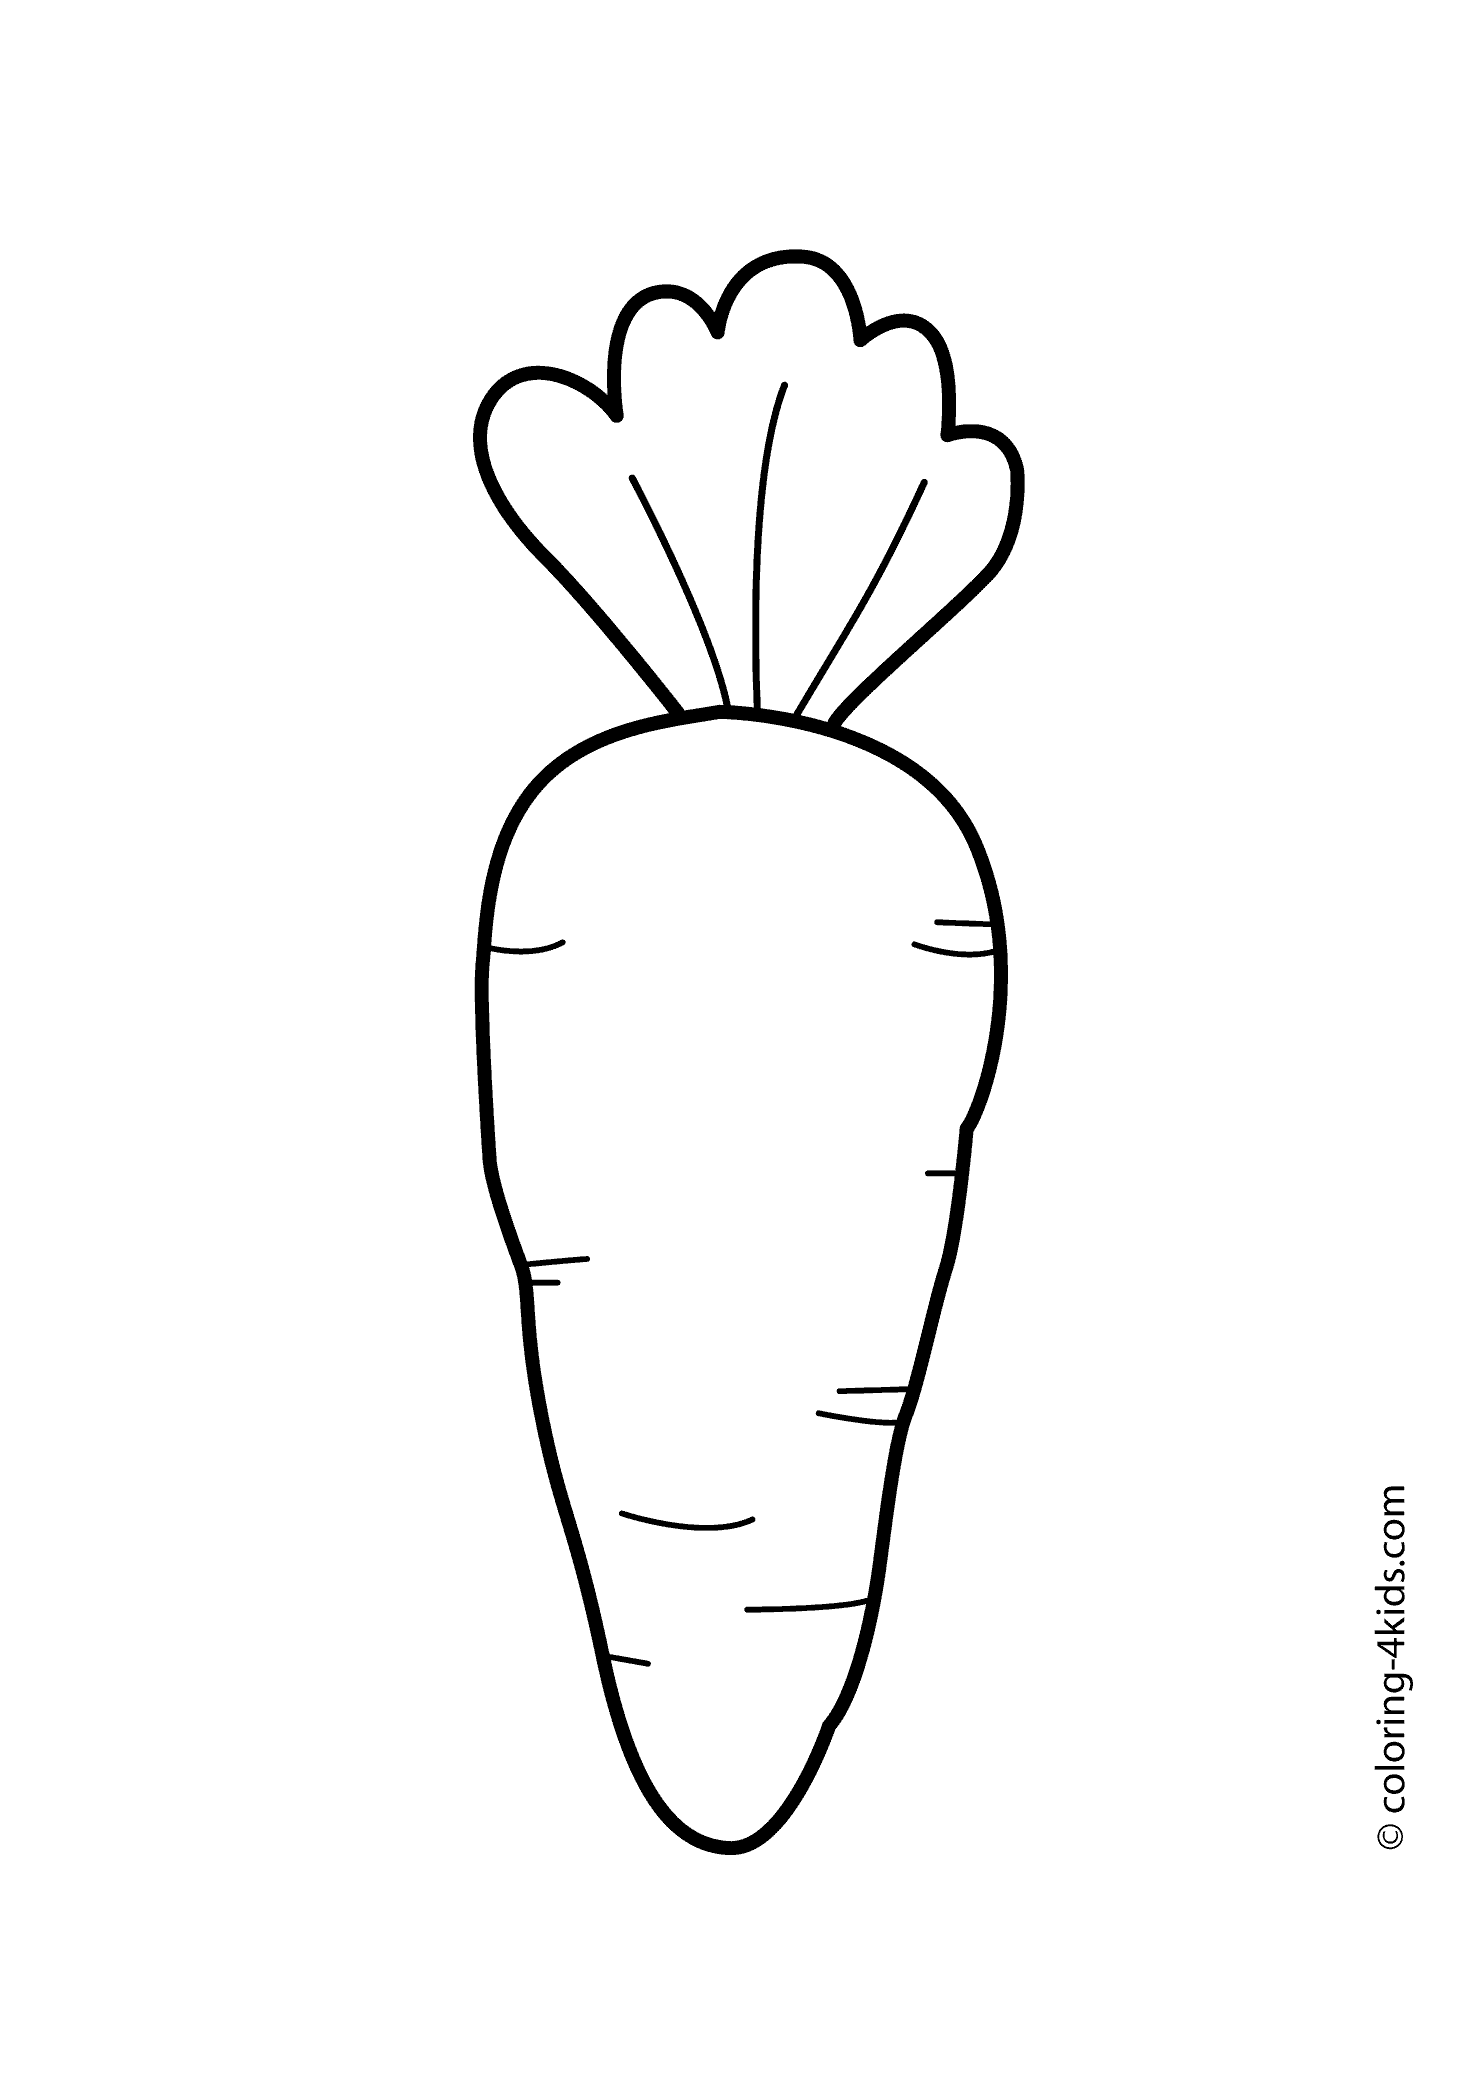 Vegetables Coloring Pages   Carrot With Leaves Vegetables Coloring    